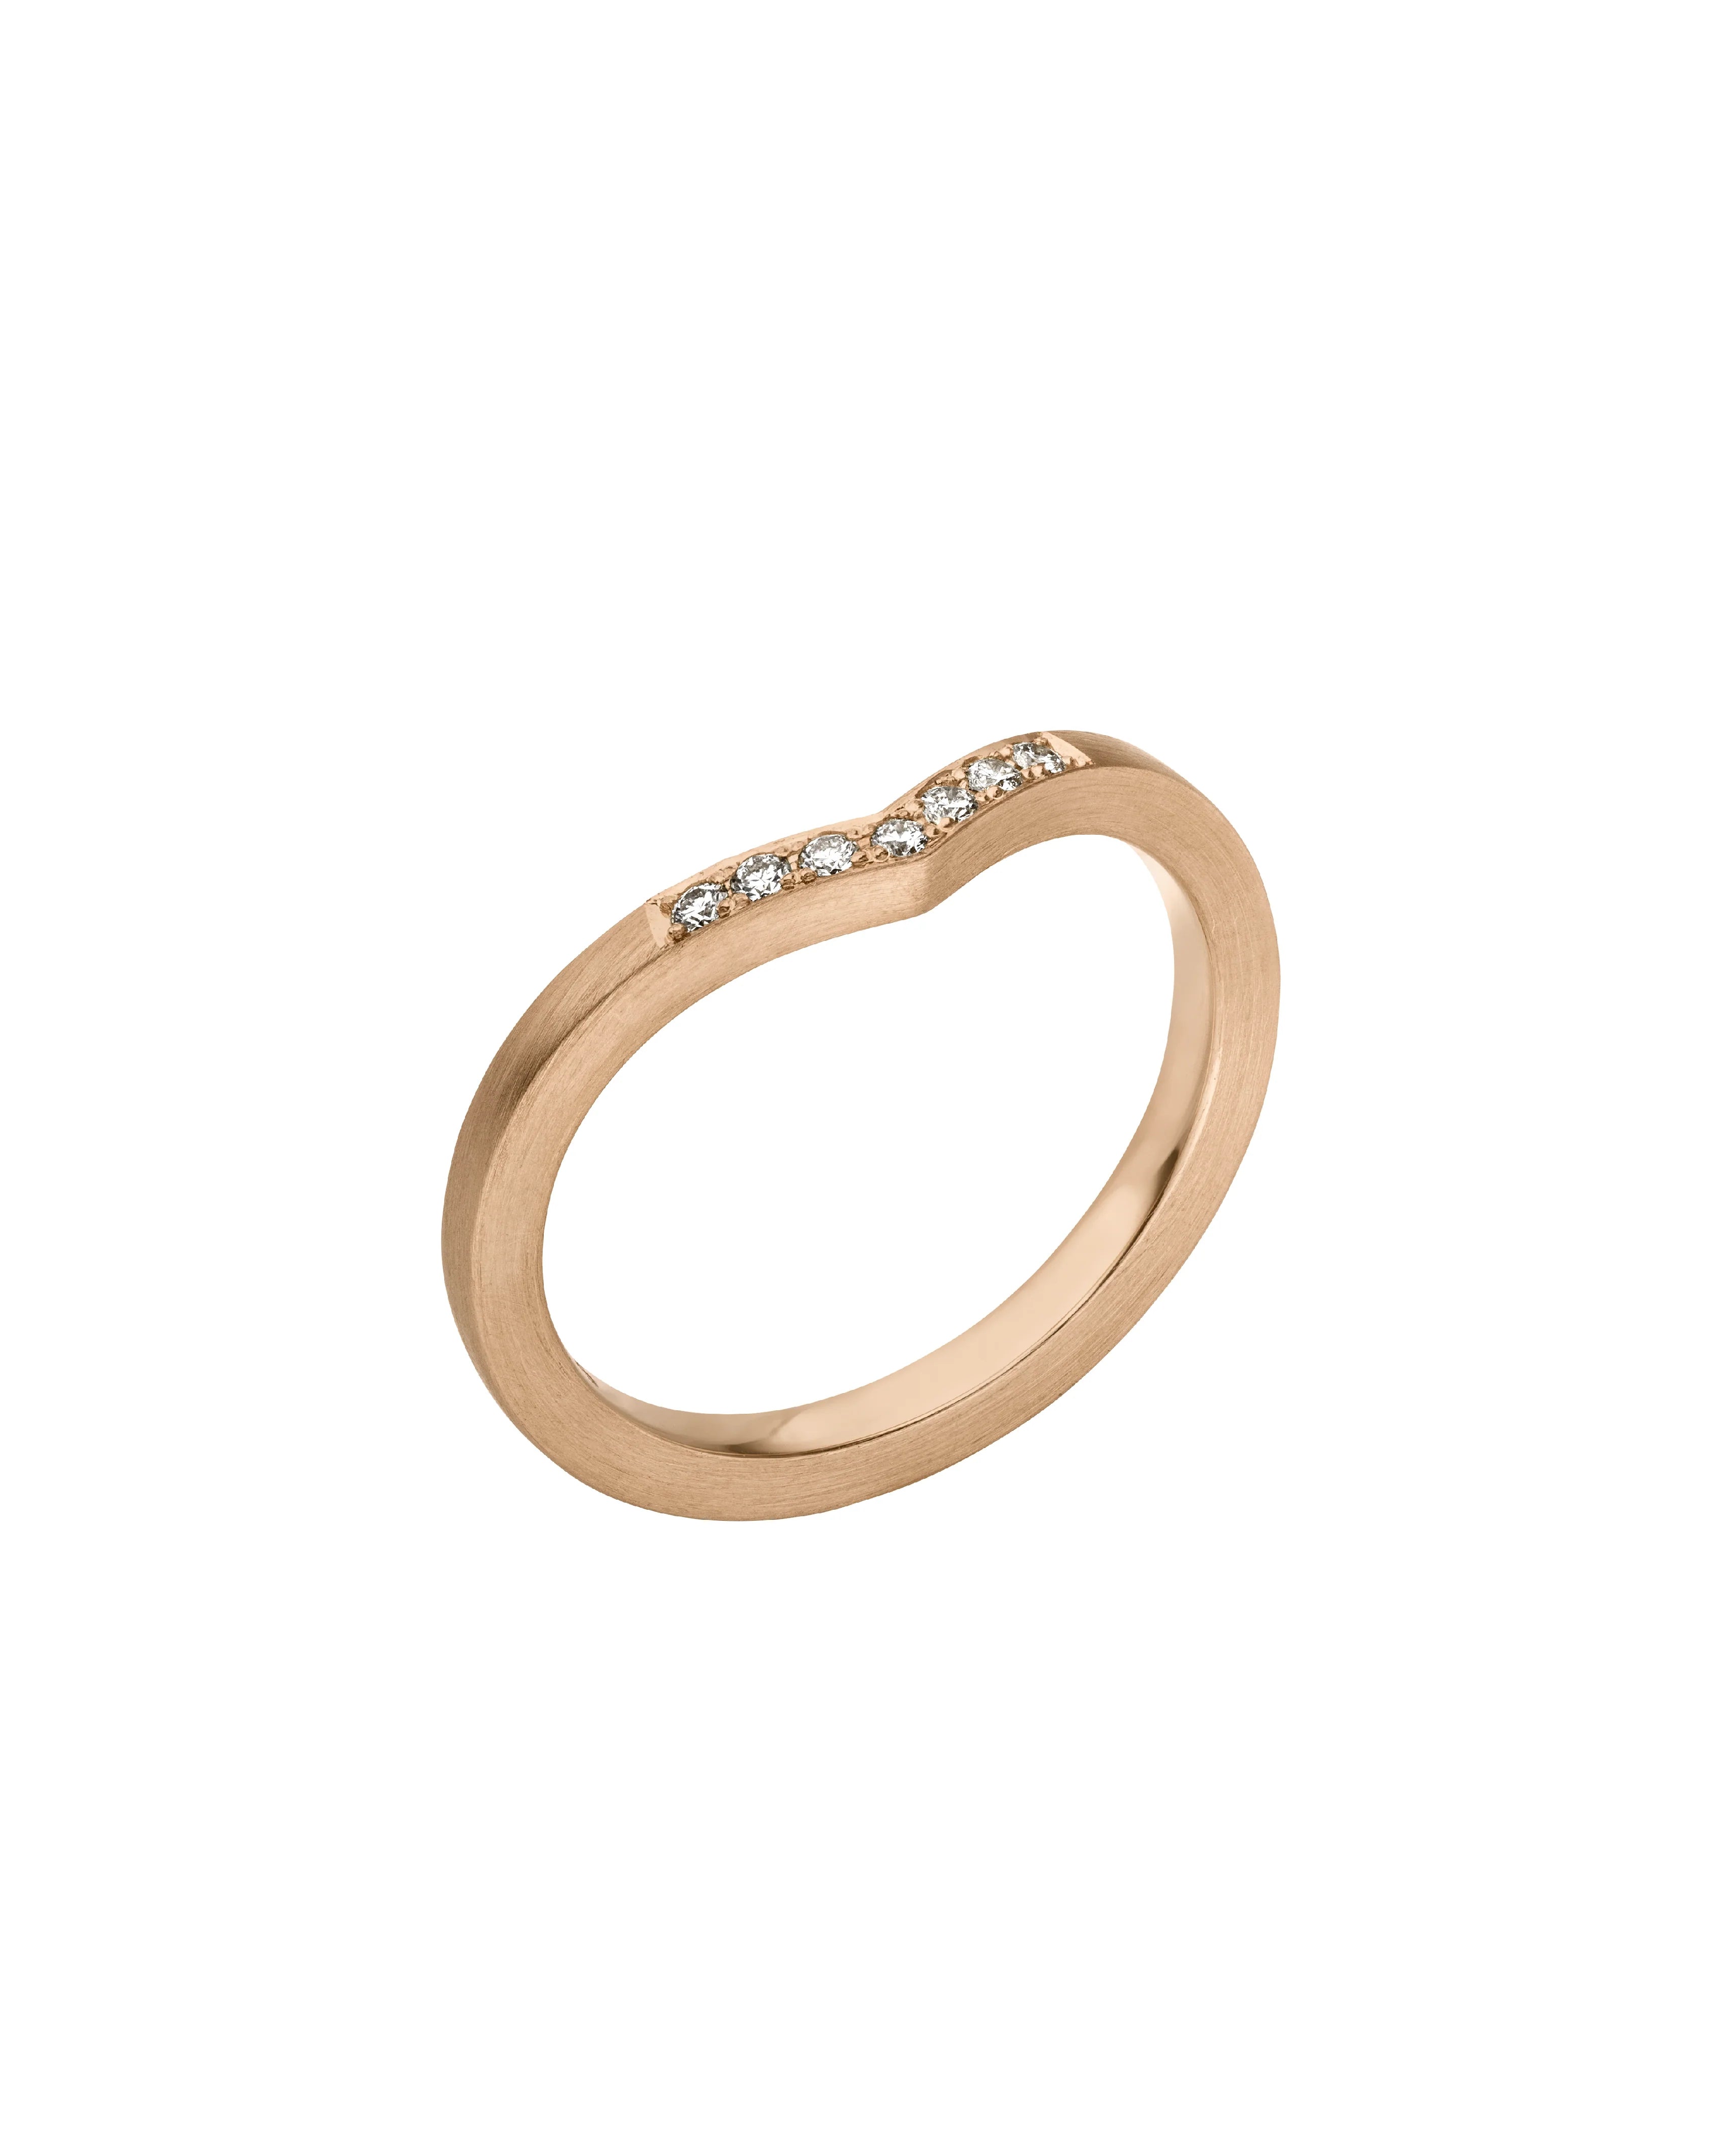 TRIANGLE Ring Roségold 750